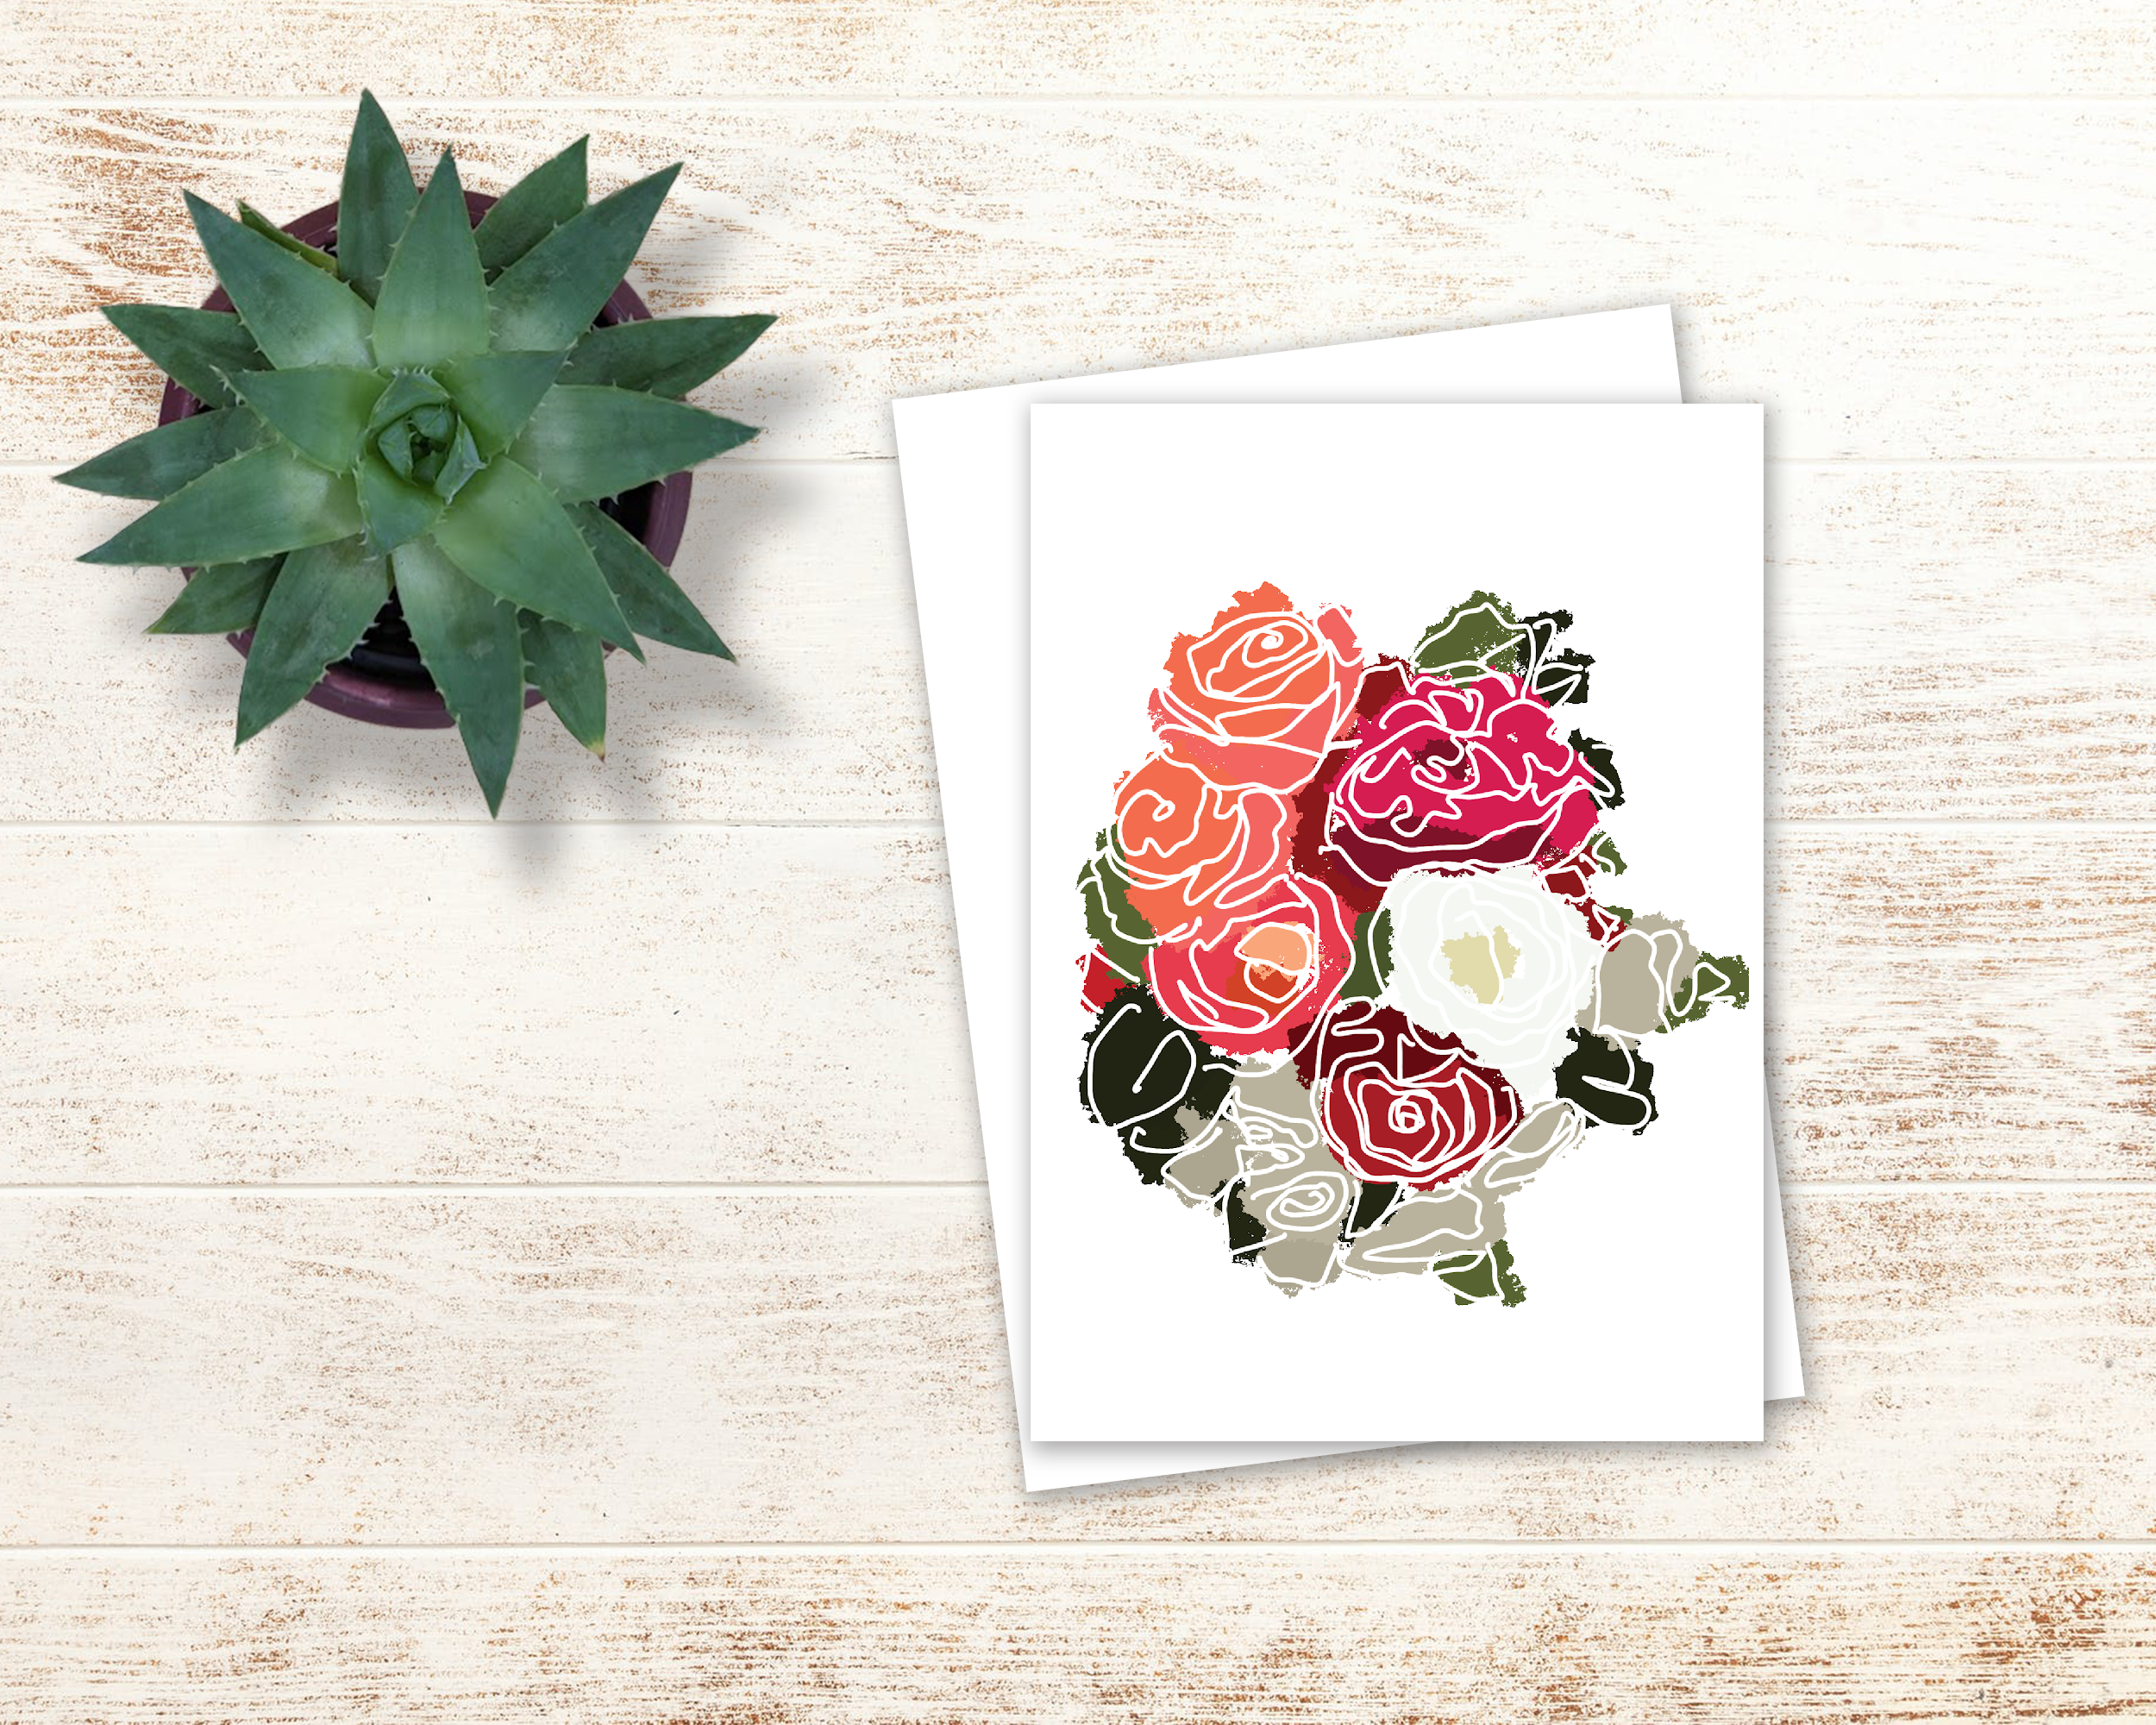 drawn floral card with white envelope by a succulent